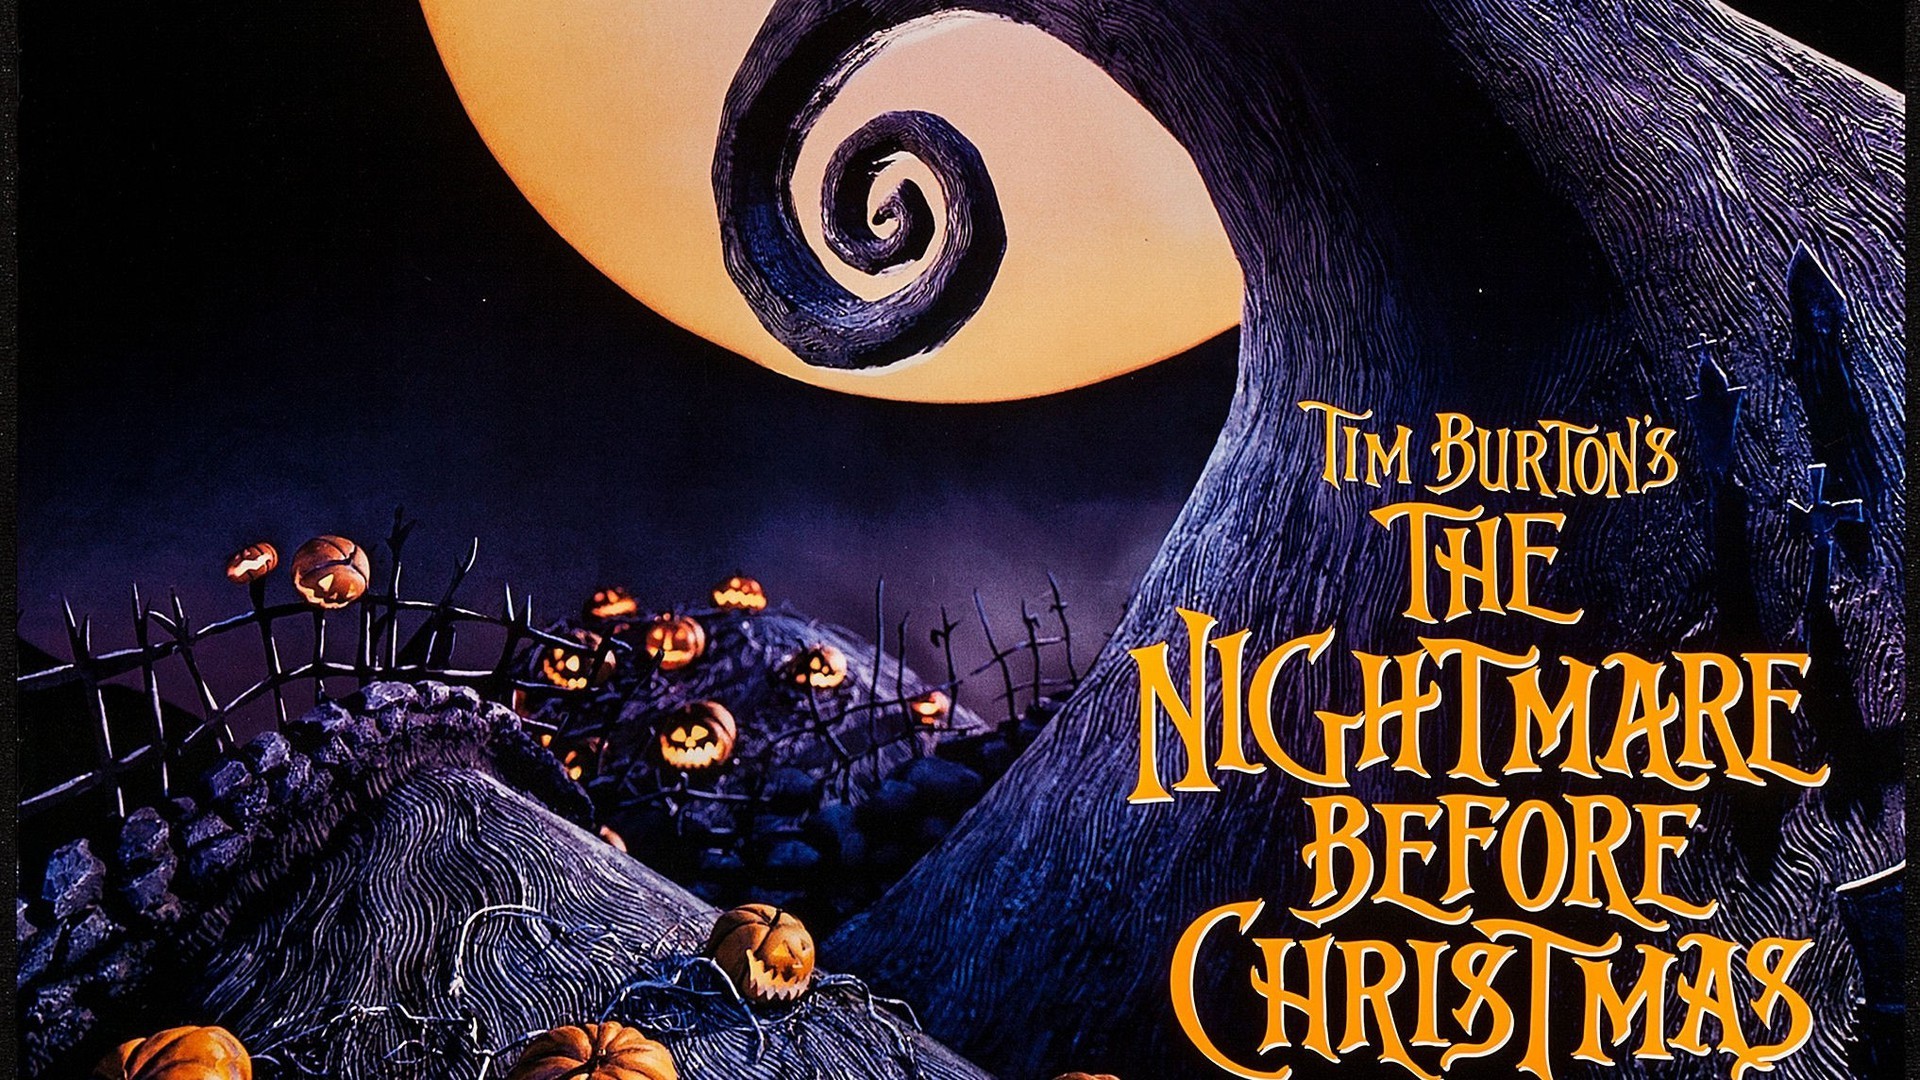 Wallpaper ID 475508  Movie The Nightmare Before Christmas Phone Wallpaper   720x1280 free download